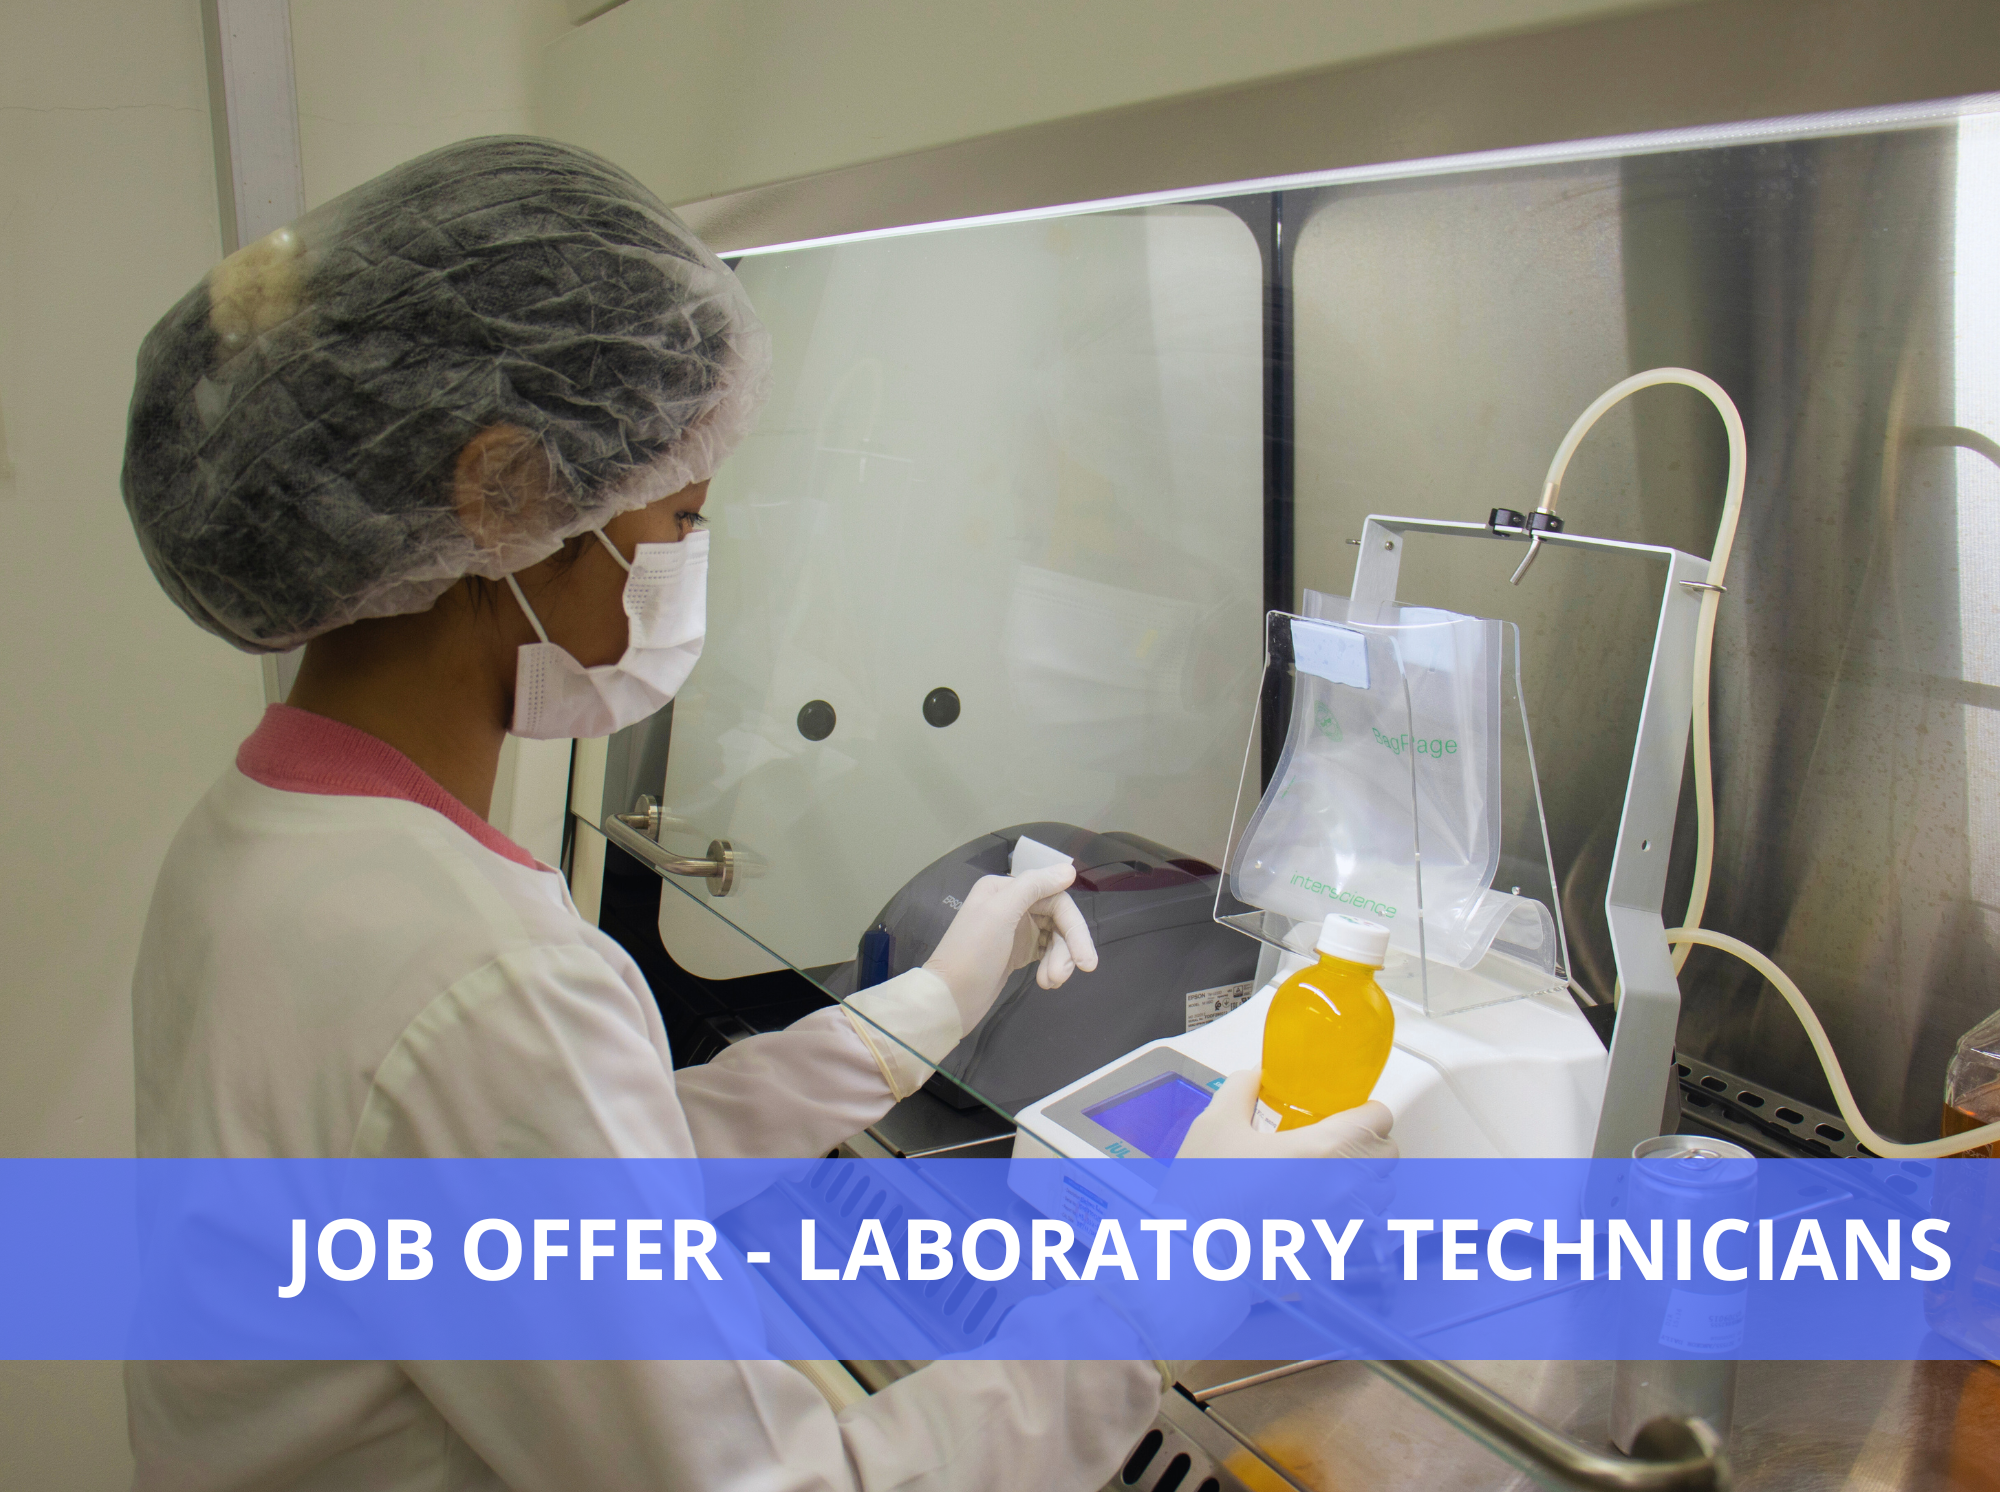 Four Lab Technicians for Environment and Food Safety Laboratory